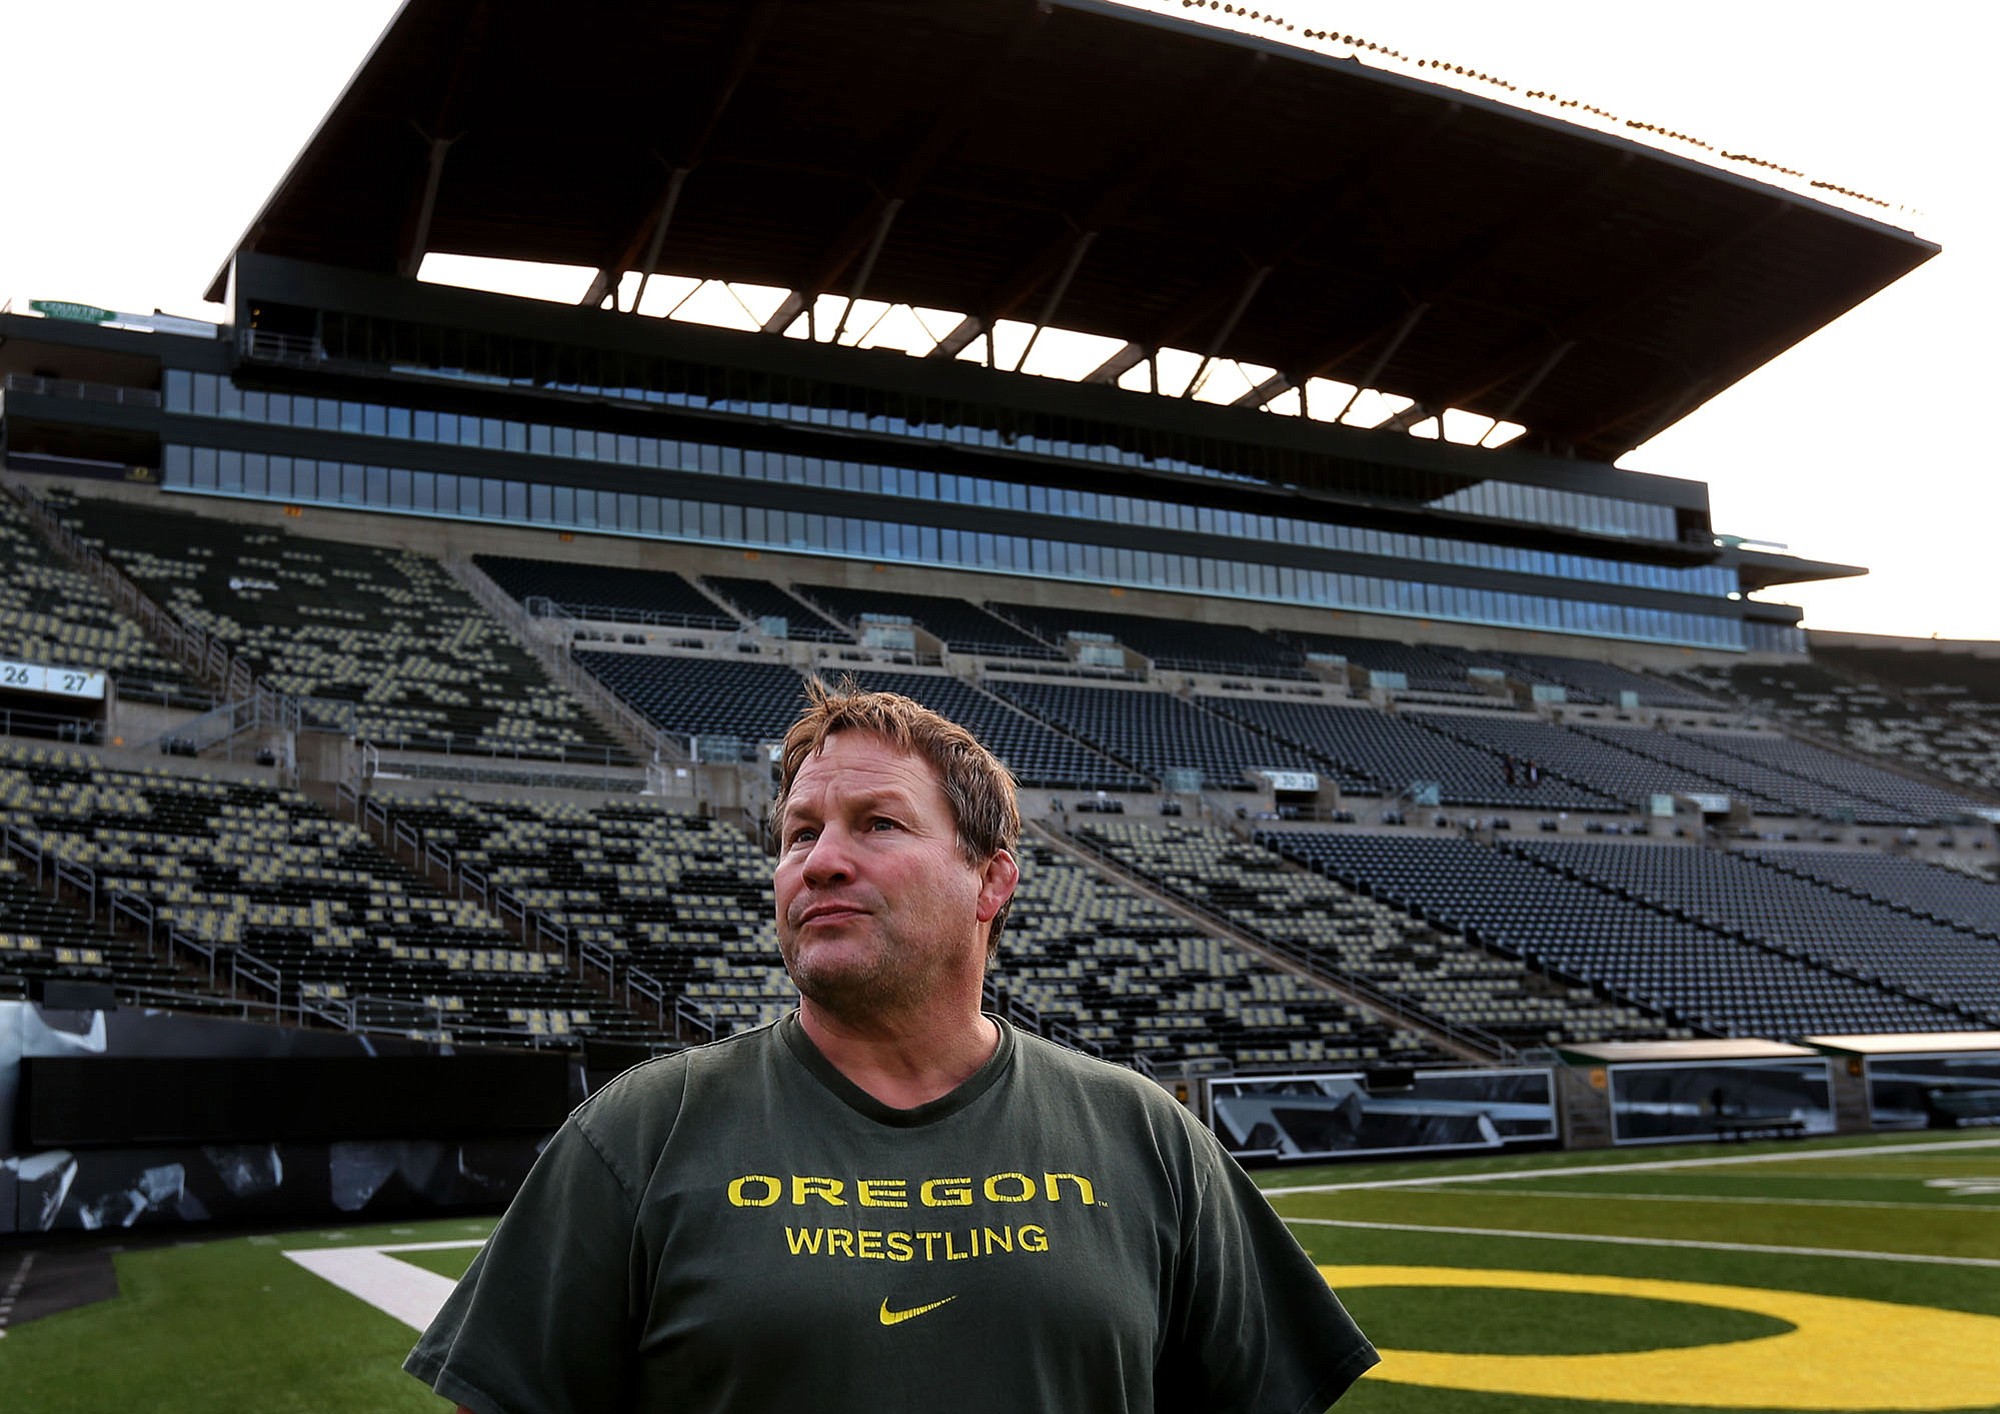 Rick O'Shea on Nov. 6 visits the site in Autzen Stadium where he was wounded by a sniper 30 years ago when he was a student and wrestler at the University of Oregon in Eugene, Ore.